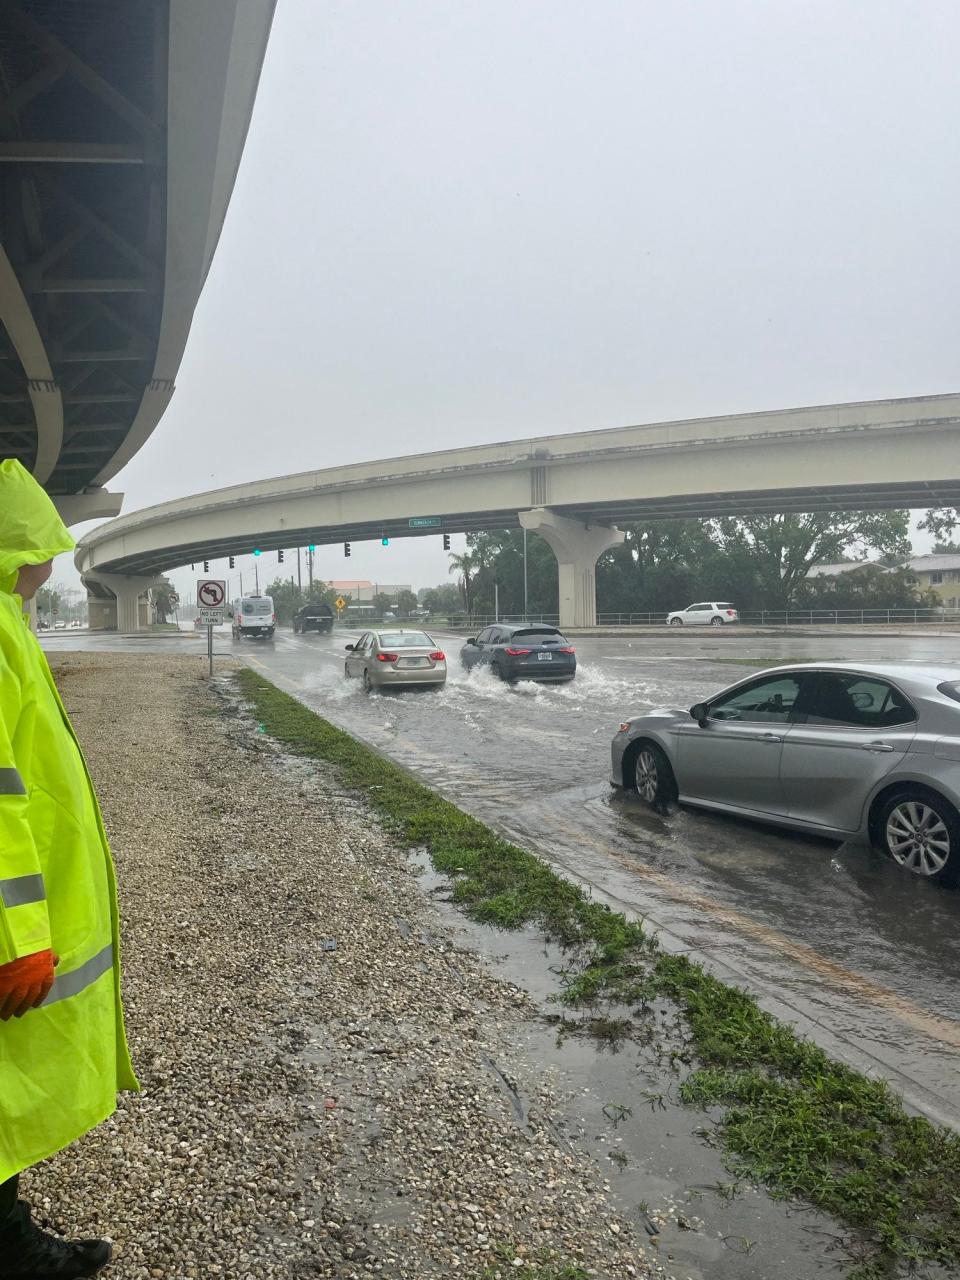 The intersection of Gladioulus Drive and Summerlin Road was impassable Wednesday afternoon due to localized flooding.